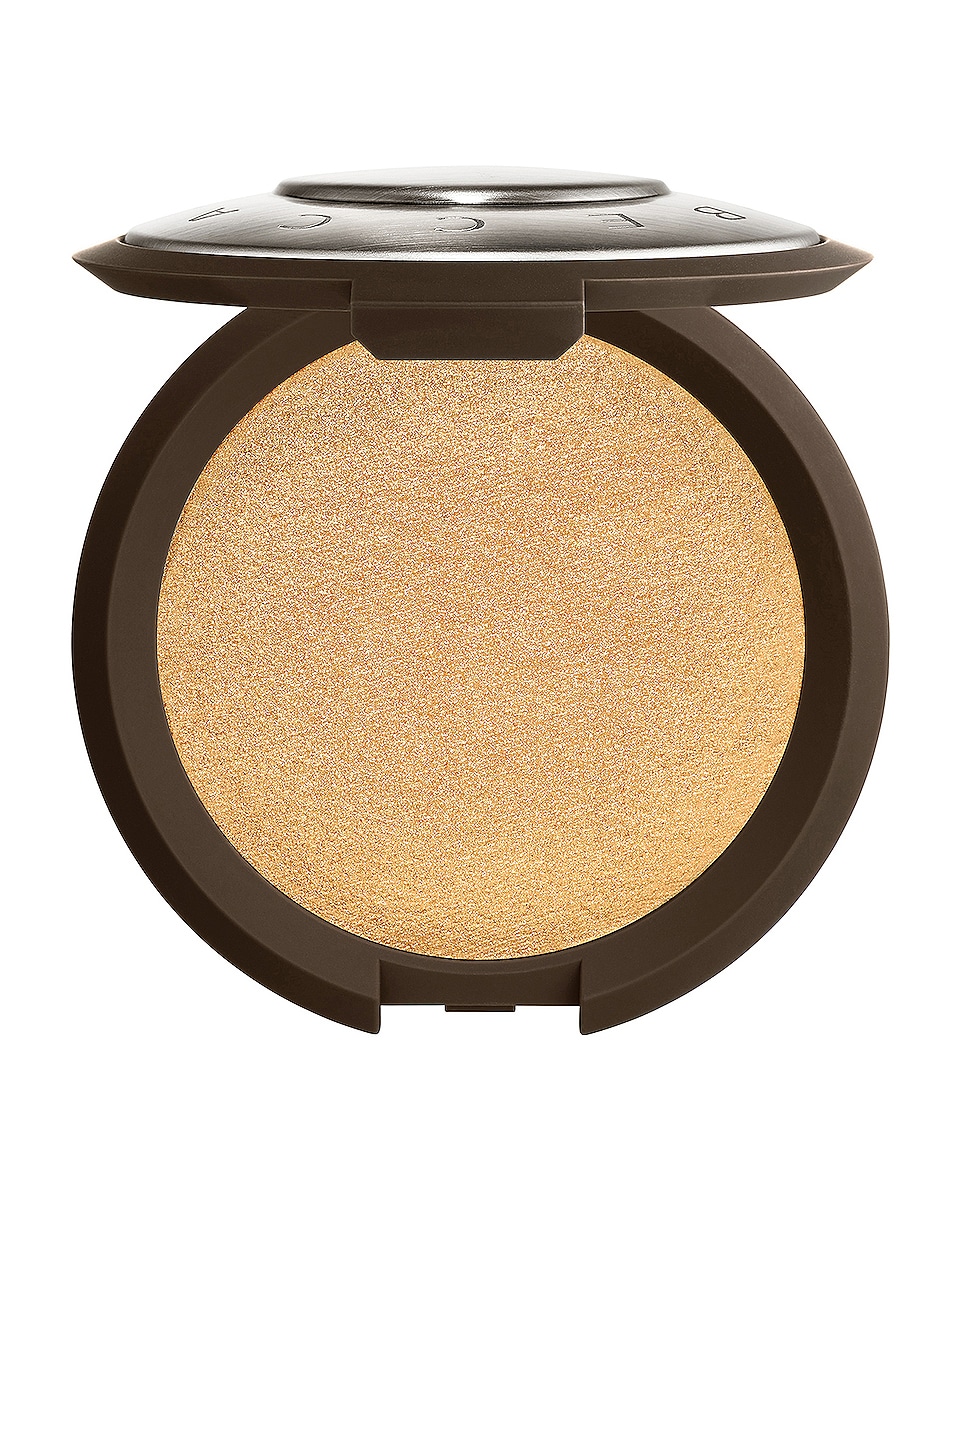 BECCA COSMETICS SHIMMERING SKIN PERFECTOR PRESSED HIGHLIGHTER,BECR-WU150